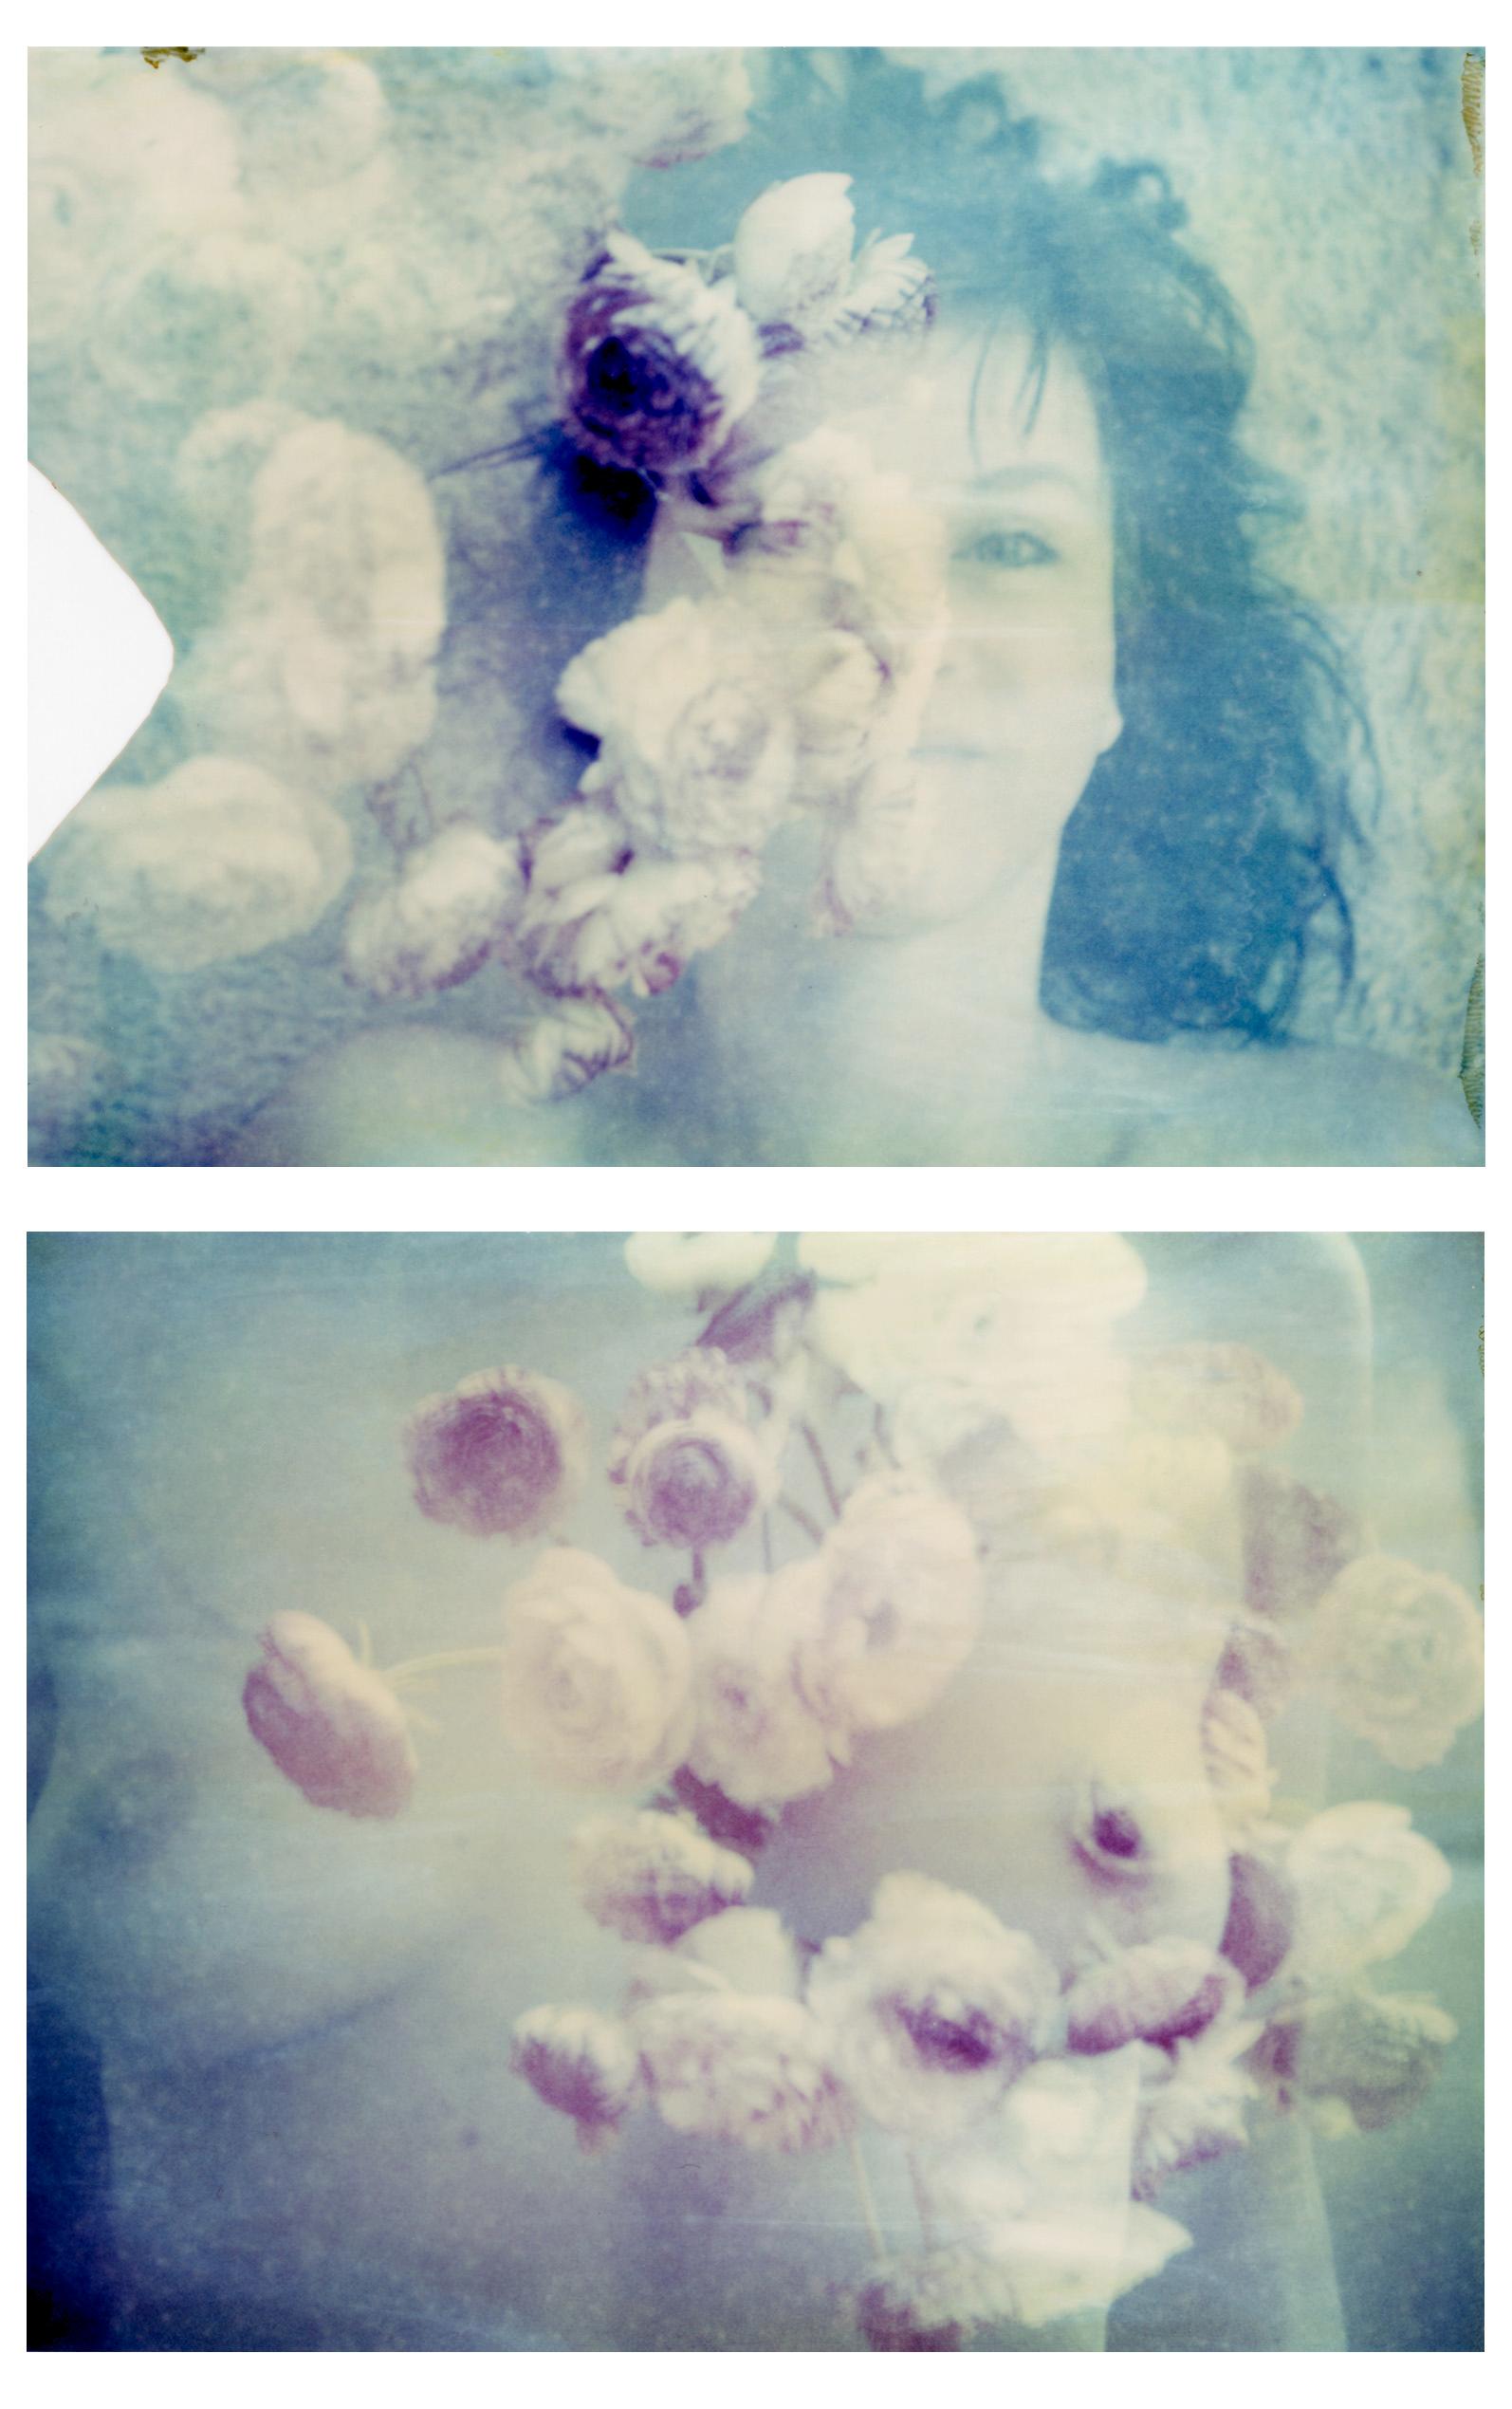 Carmen de Vos Color Photograph - RANONKEL #diptych [From the series Need to Be] - Polaroid, Nude, Portrait